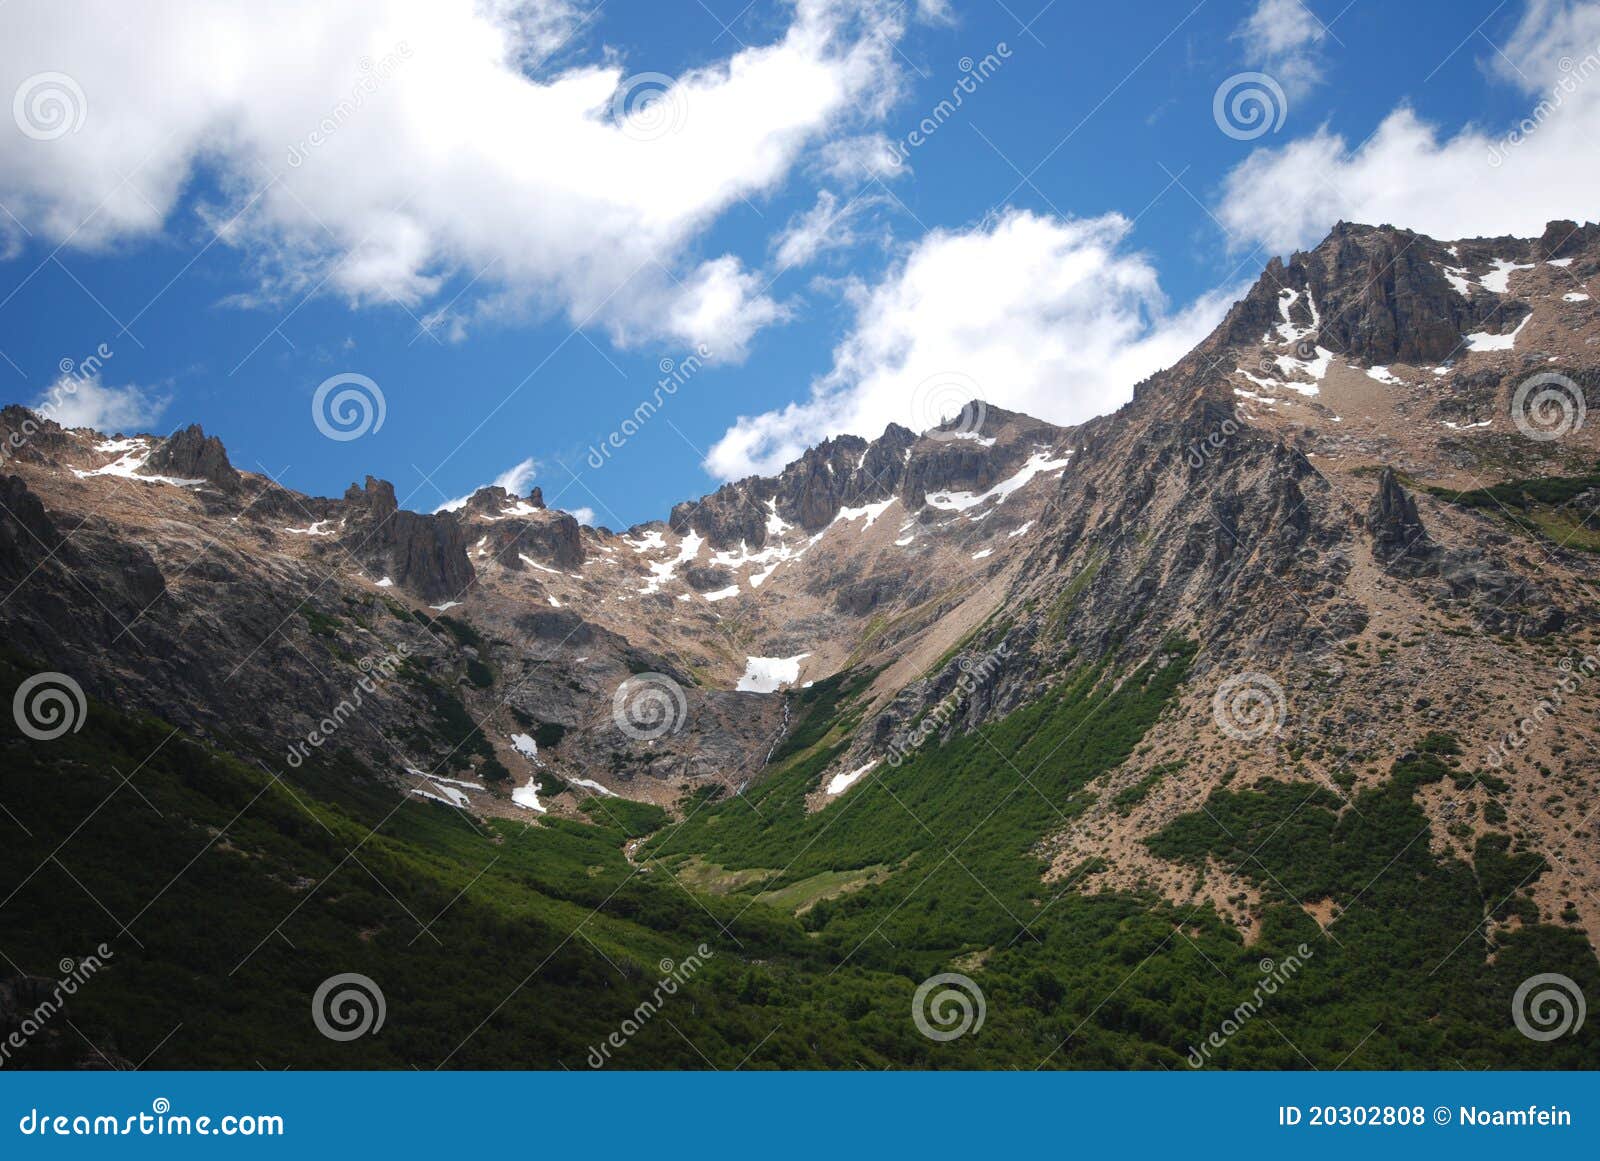 Green Valley With Snow On The Peaks Stock Photo Image Of Landscapes